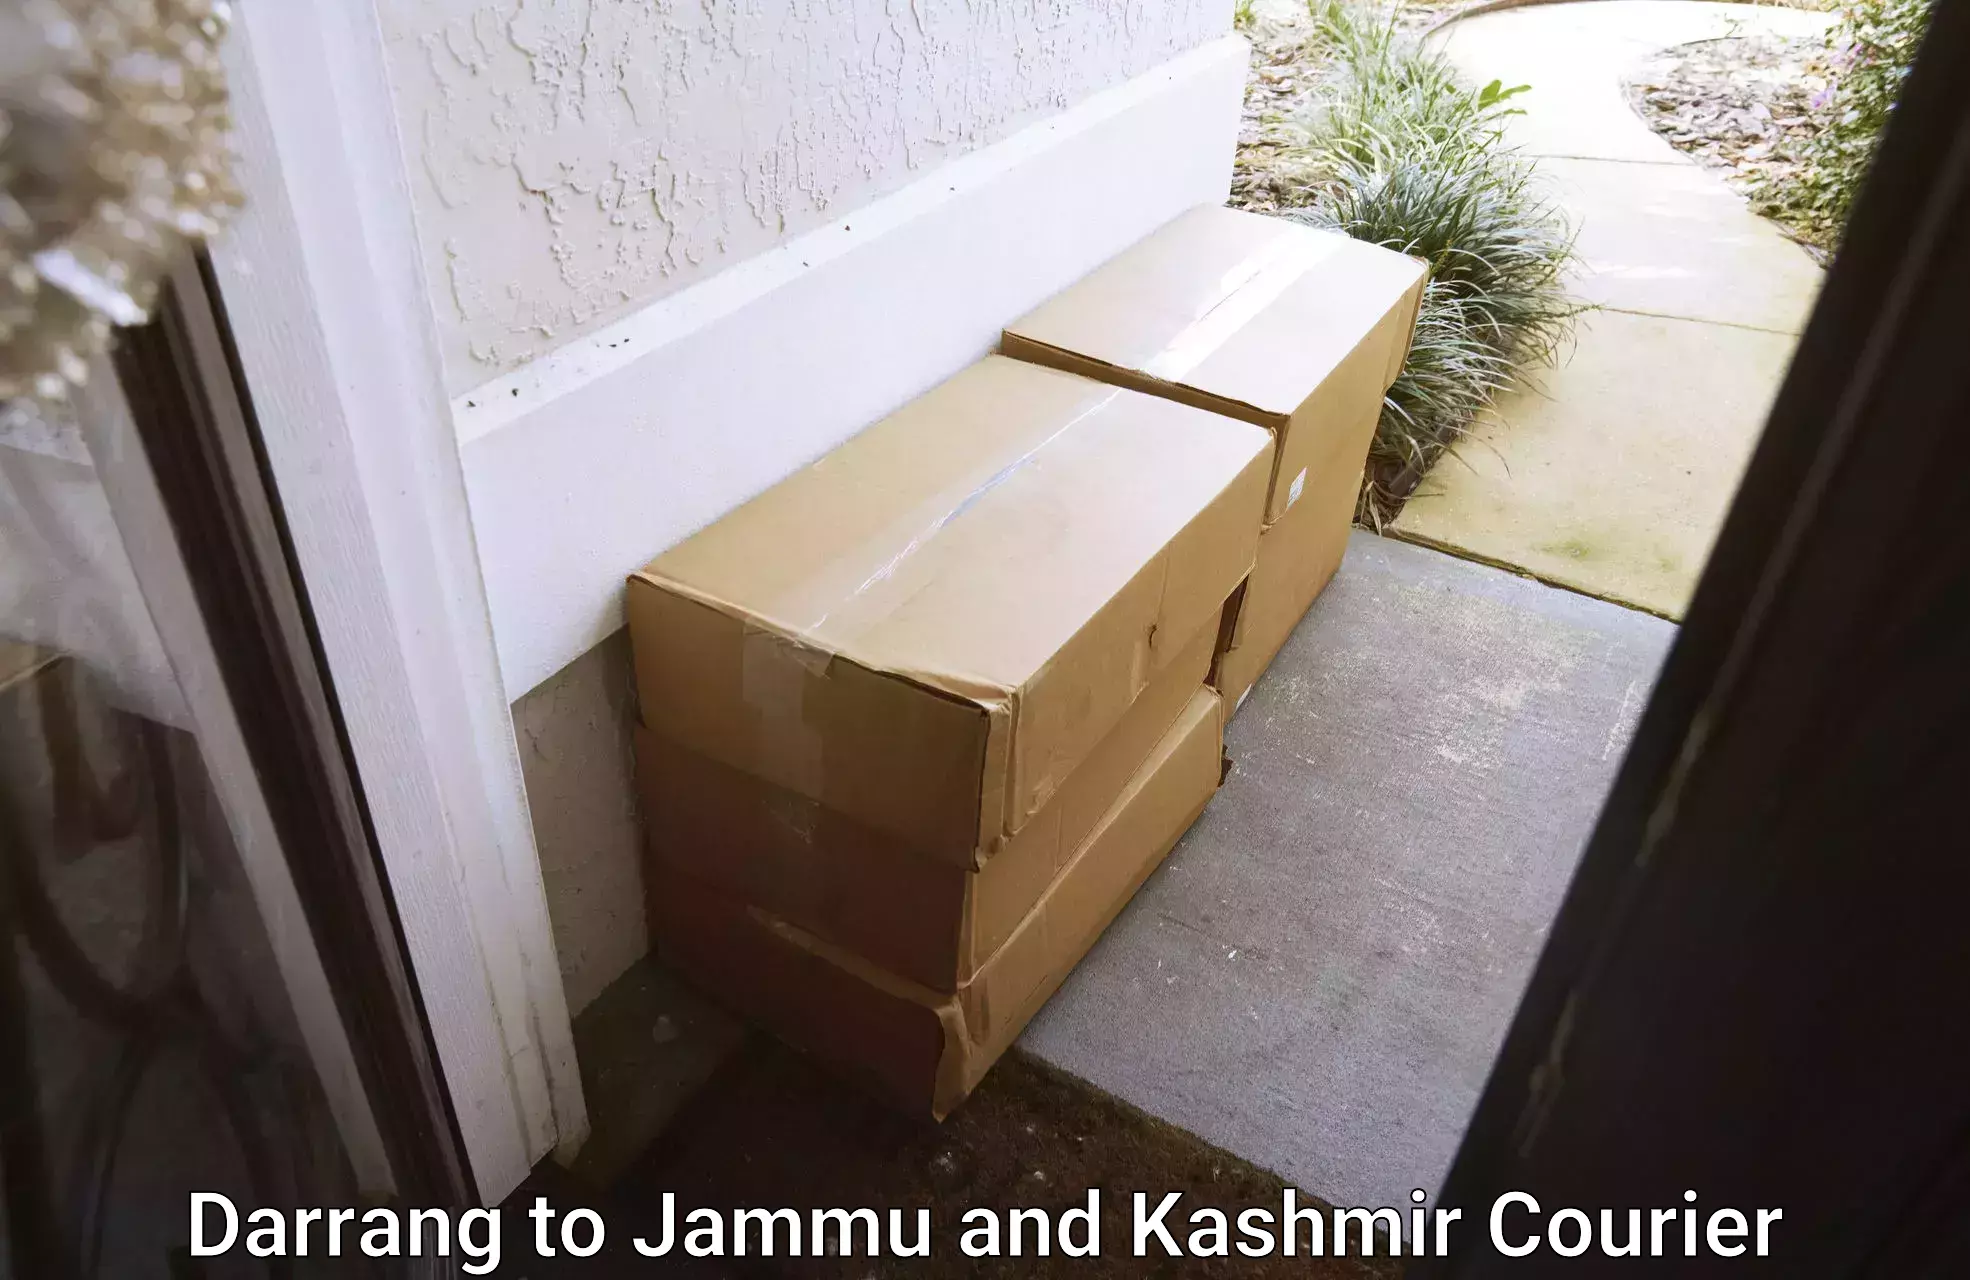 Multi-service courier options Darrang to Jammu and Kashmir